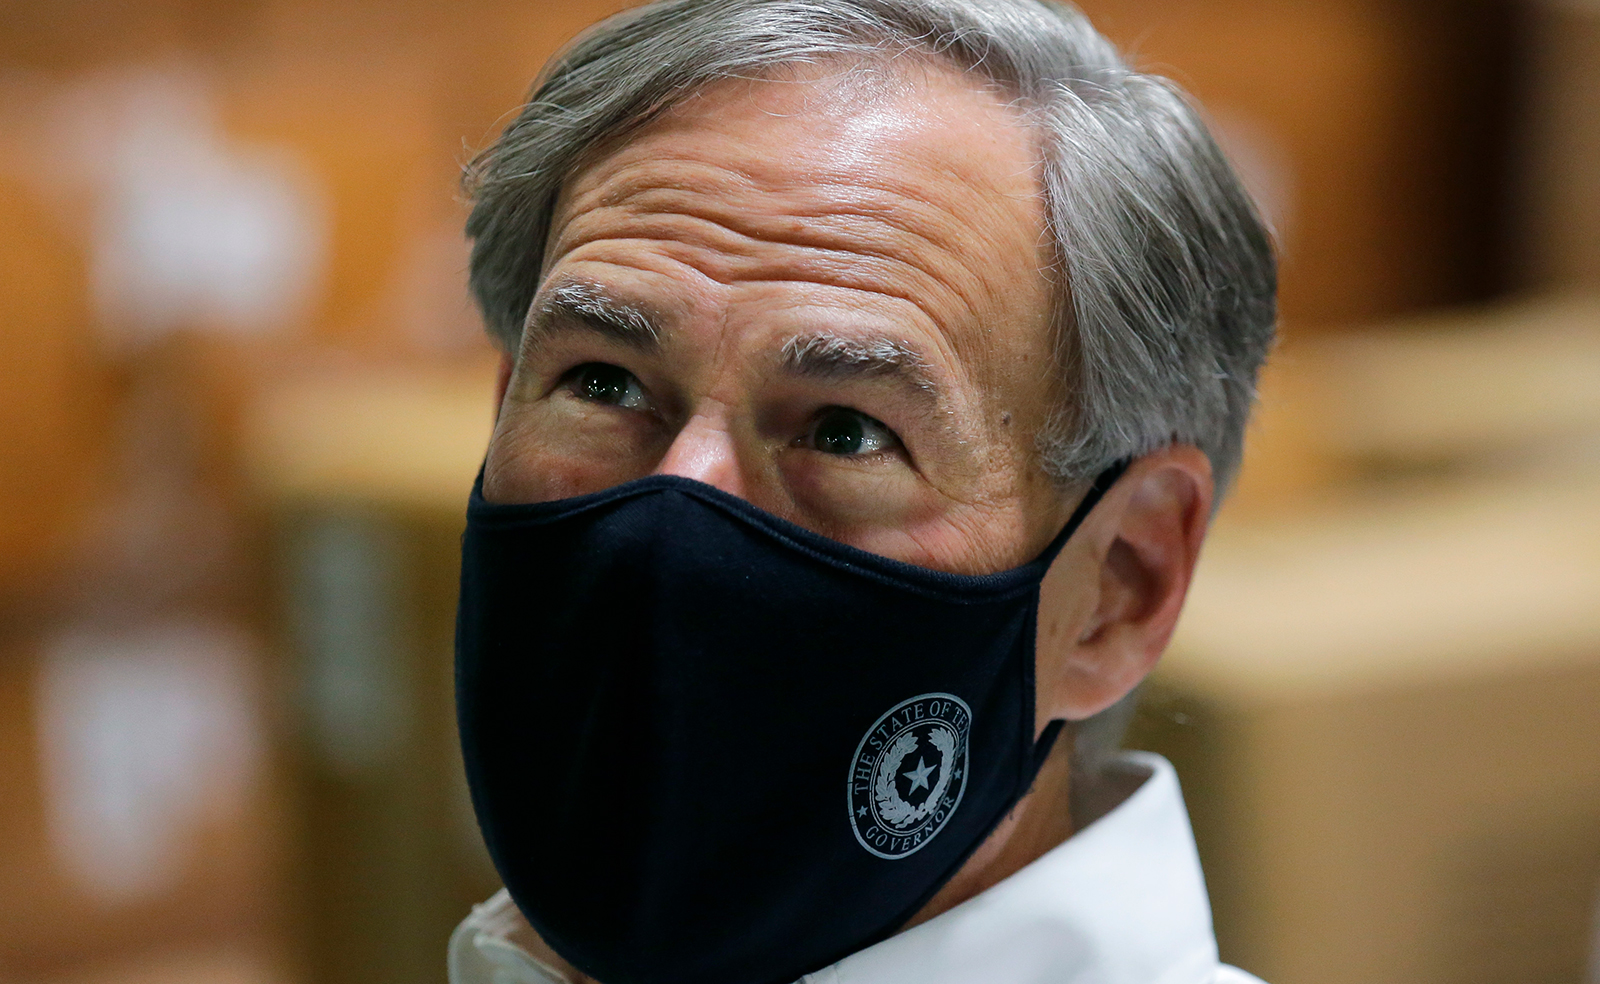 Texas Gov. Greg Abbott visits a Texas Division of Emergency Management Warehouse filled with Personal Protective Equipment on Tuesday in San Antonio.